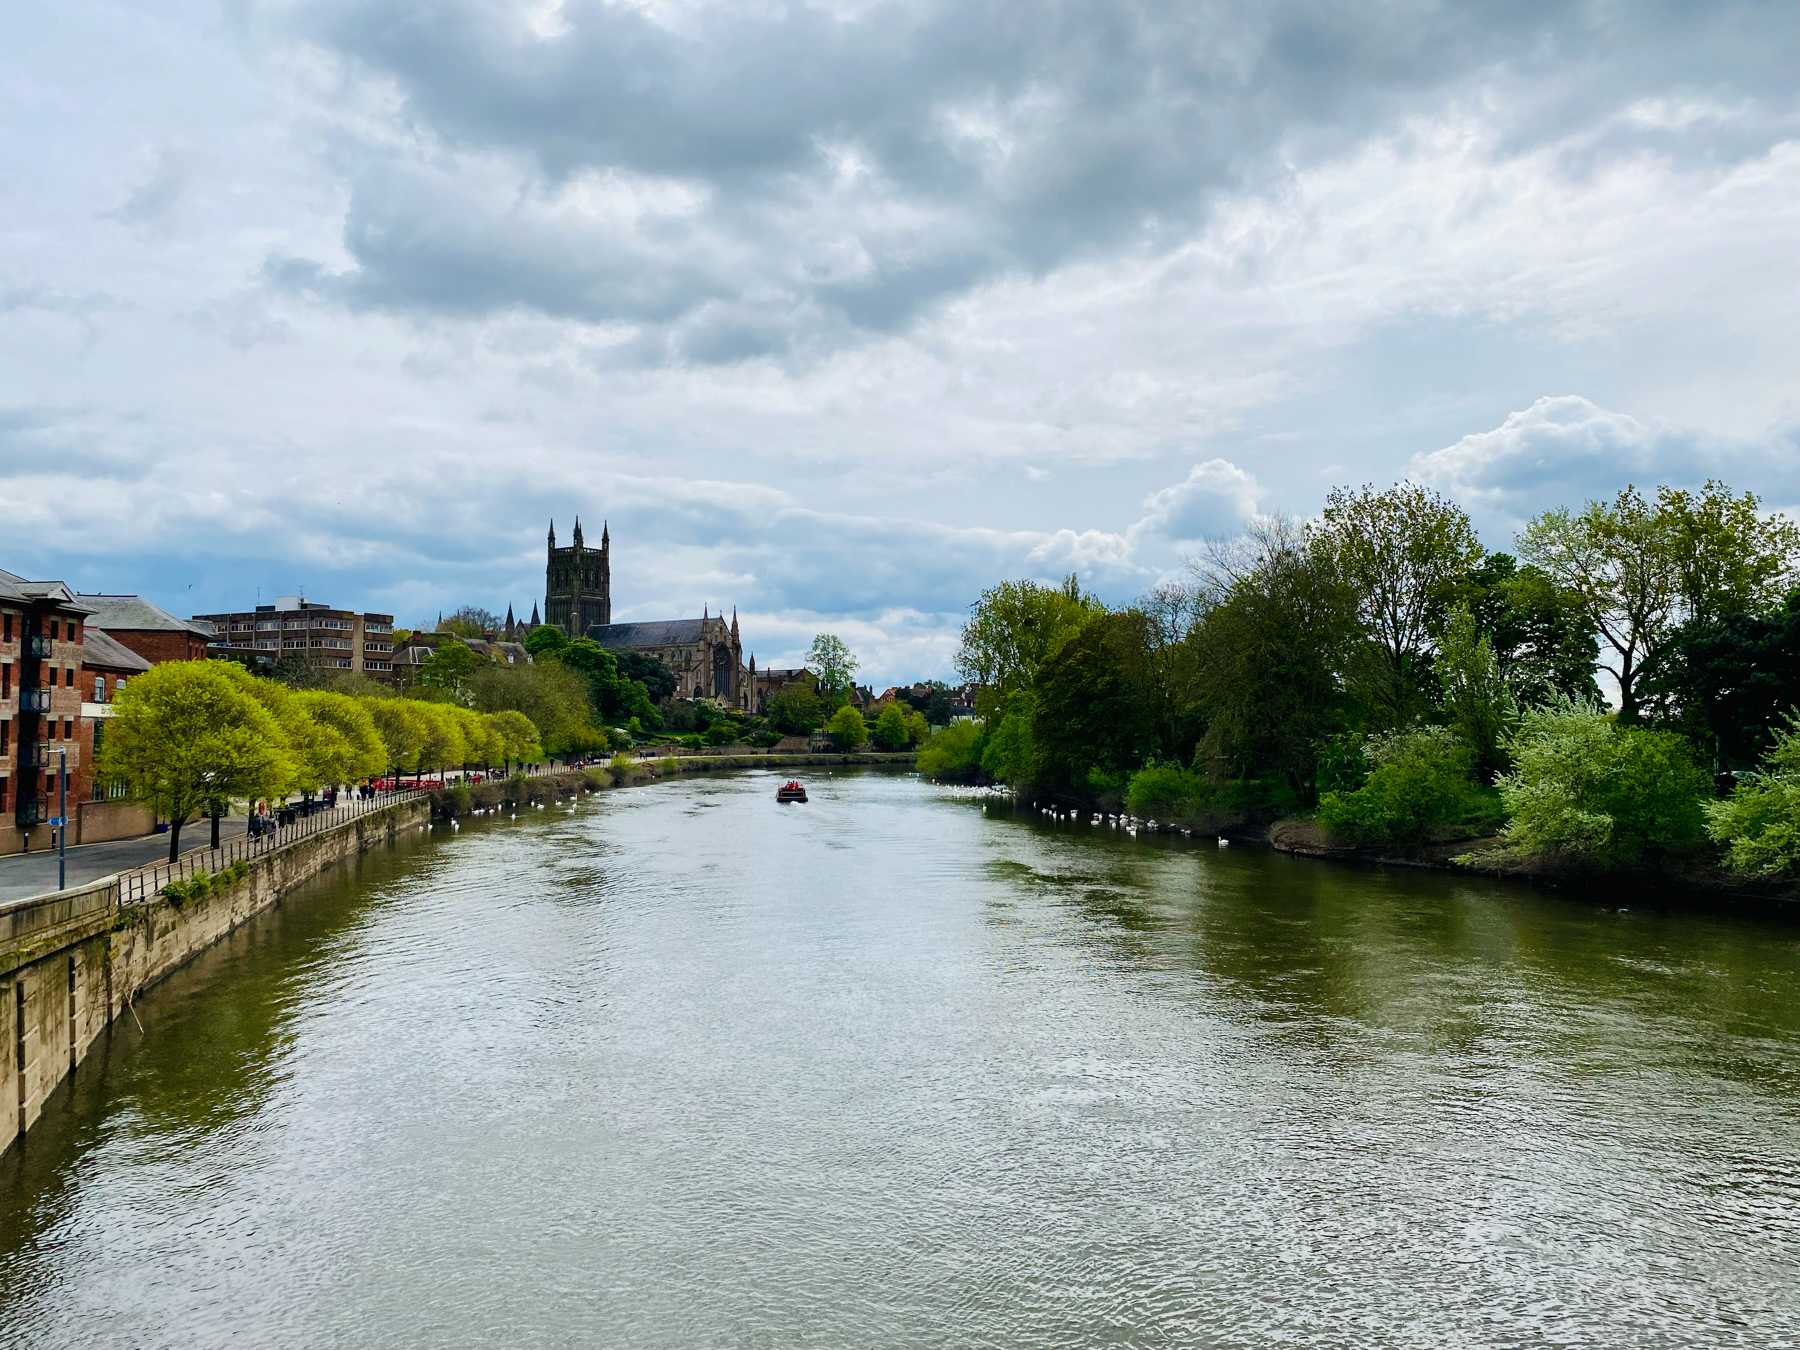 A river flowing through a city with green trees lining the banks, a cathedral in the distance, and a cloudy sky above.